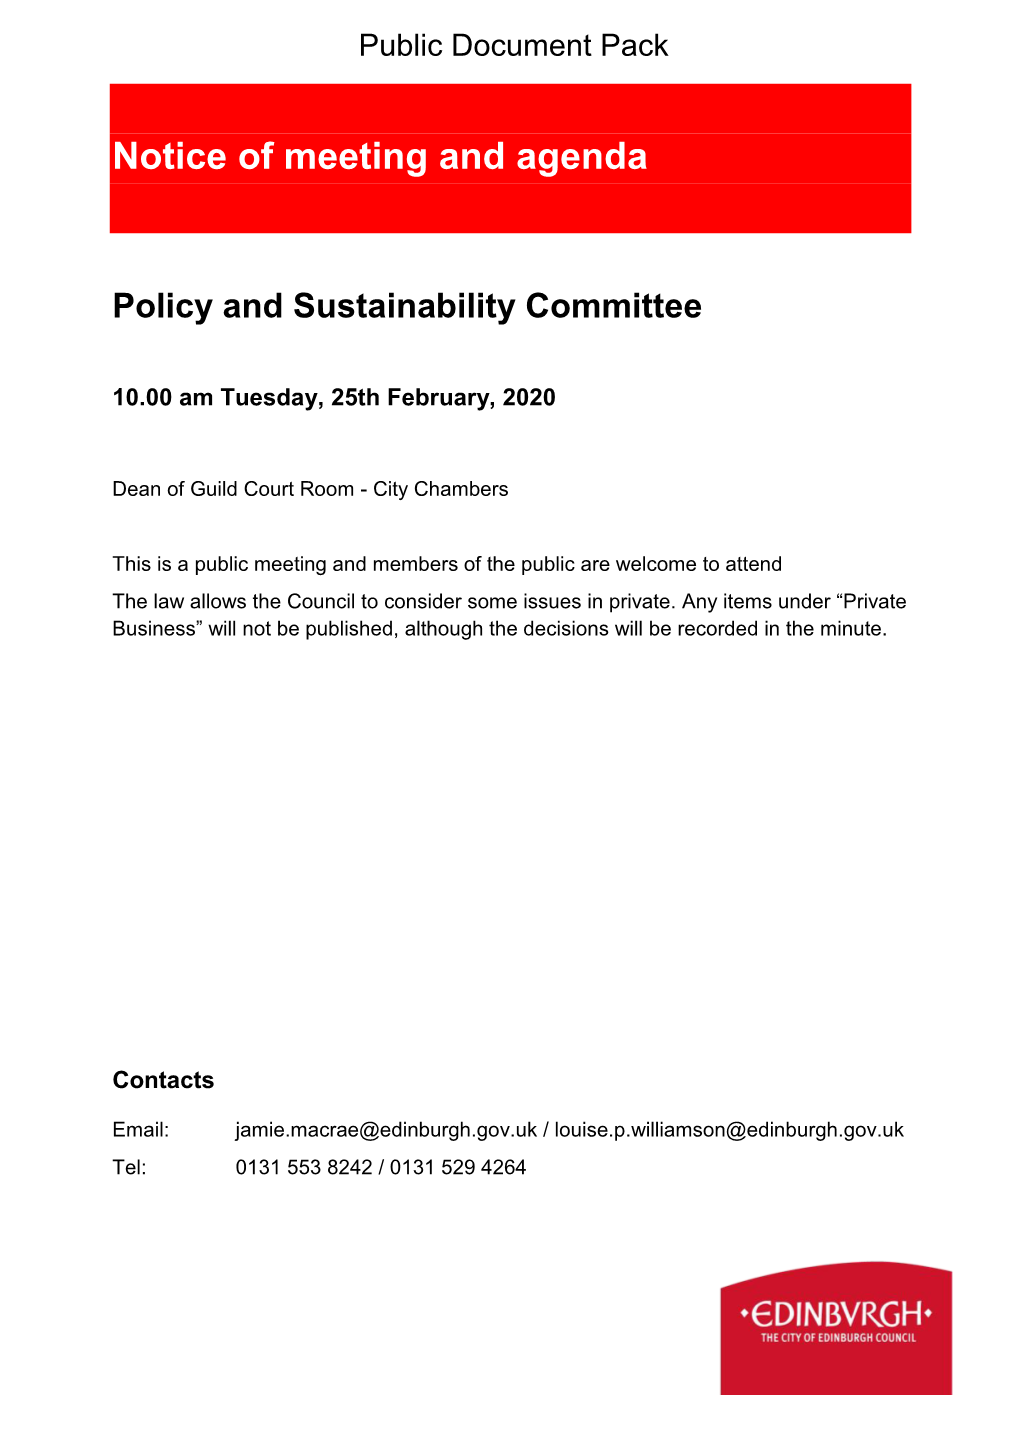 (Public Pack)Agenda Document for Policy and Sustainability Committee